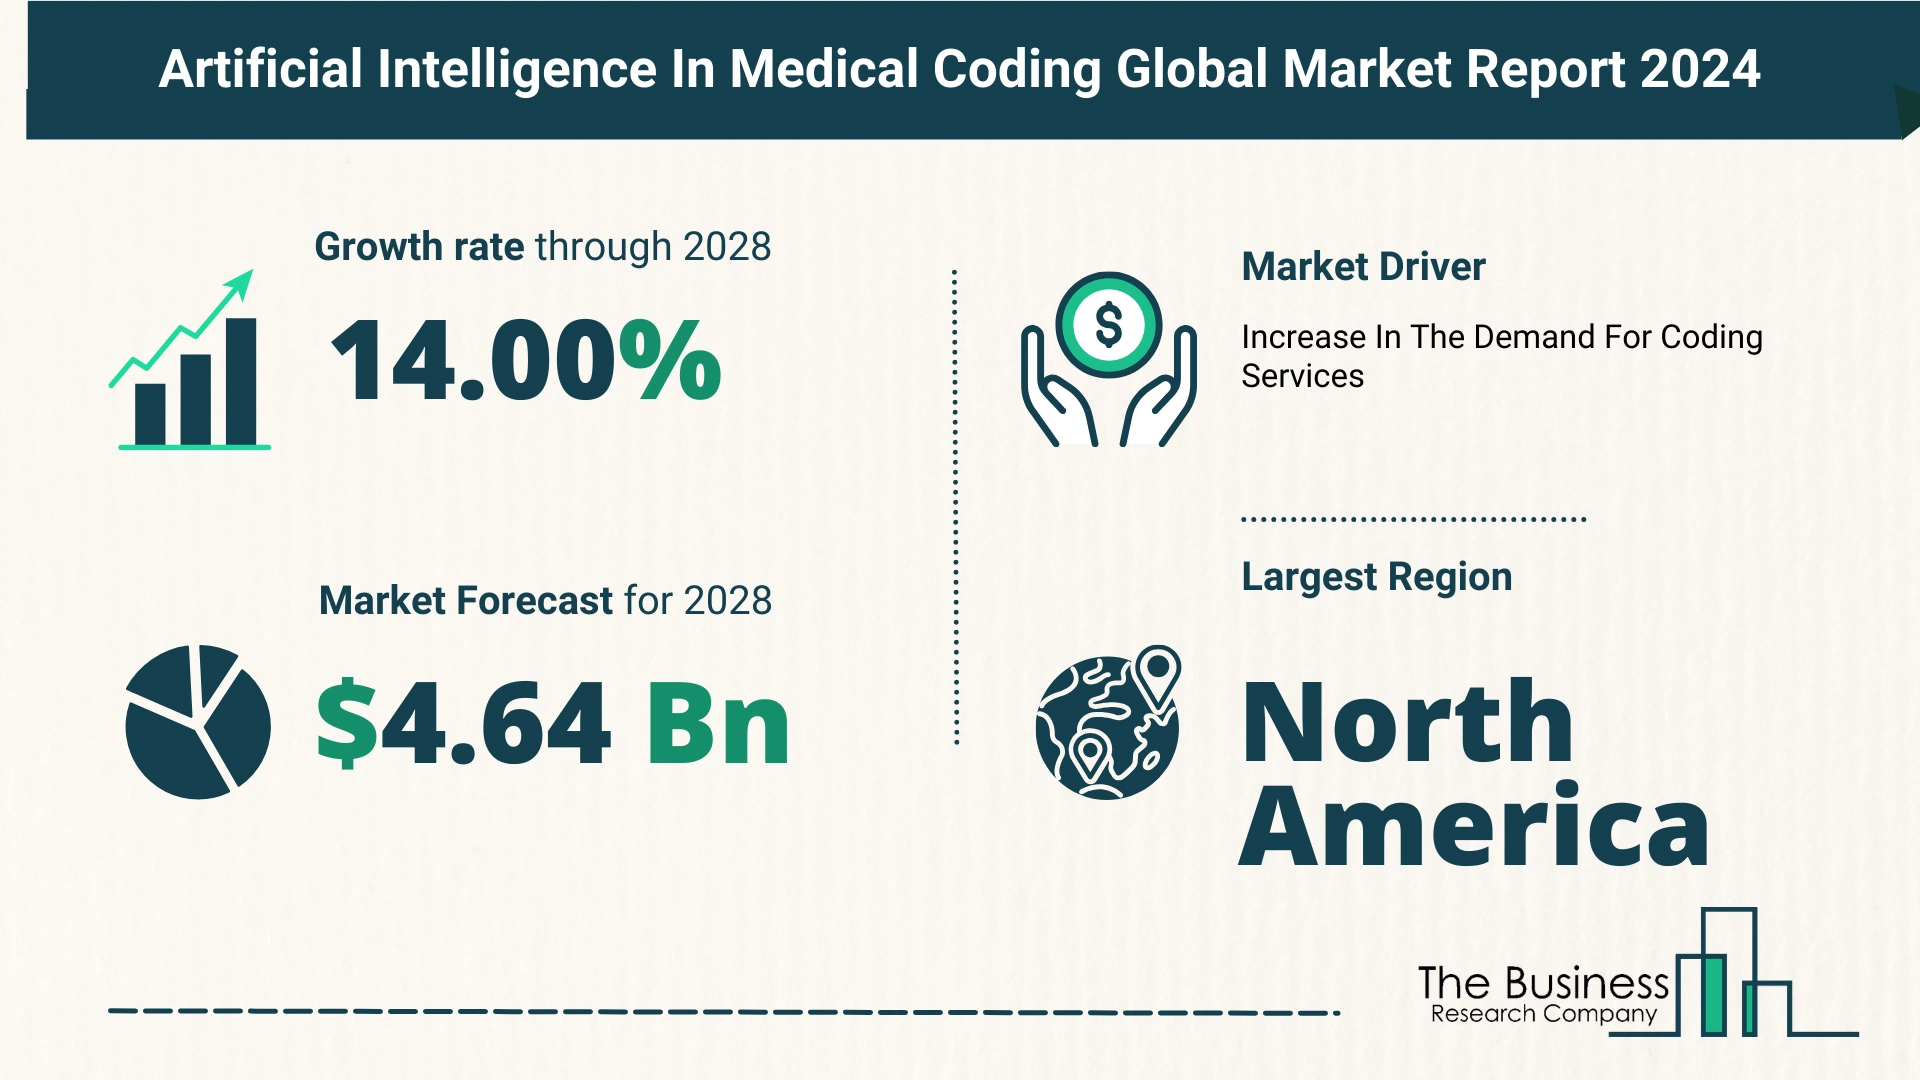 Global Artificial Intelligence In Medical Coding Market